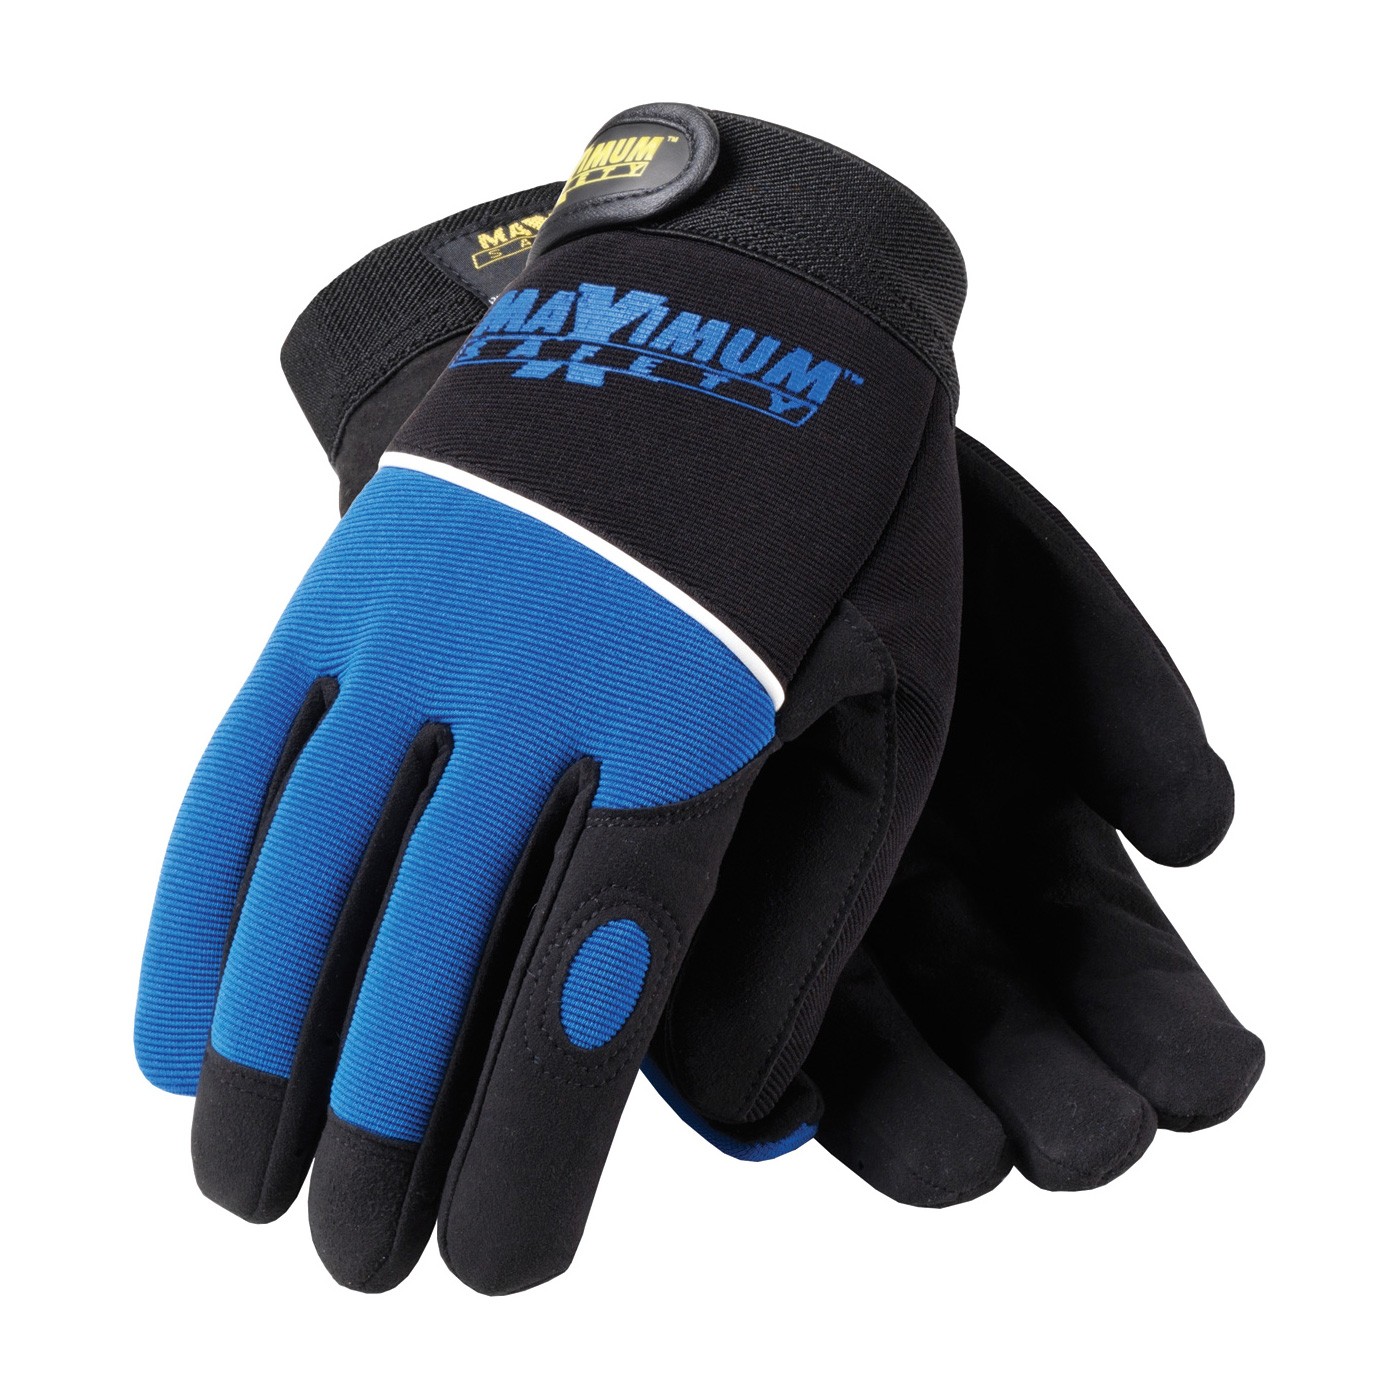 Professional Mechanic's Gloves, Blk. and Bl. Size X-Large